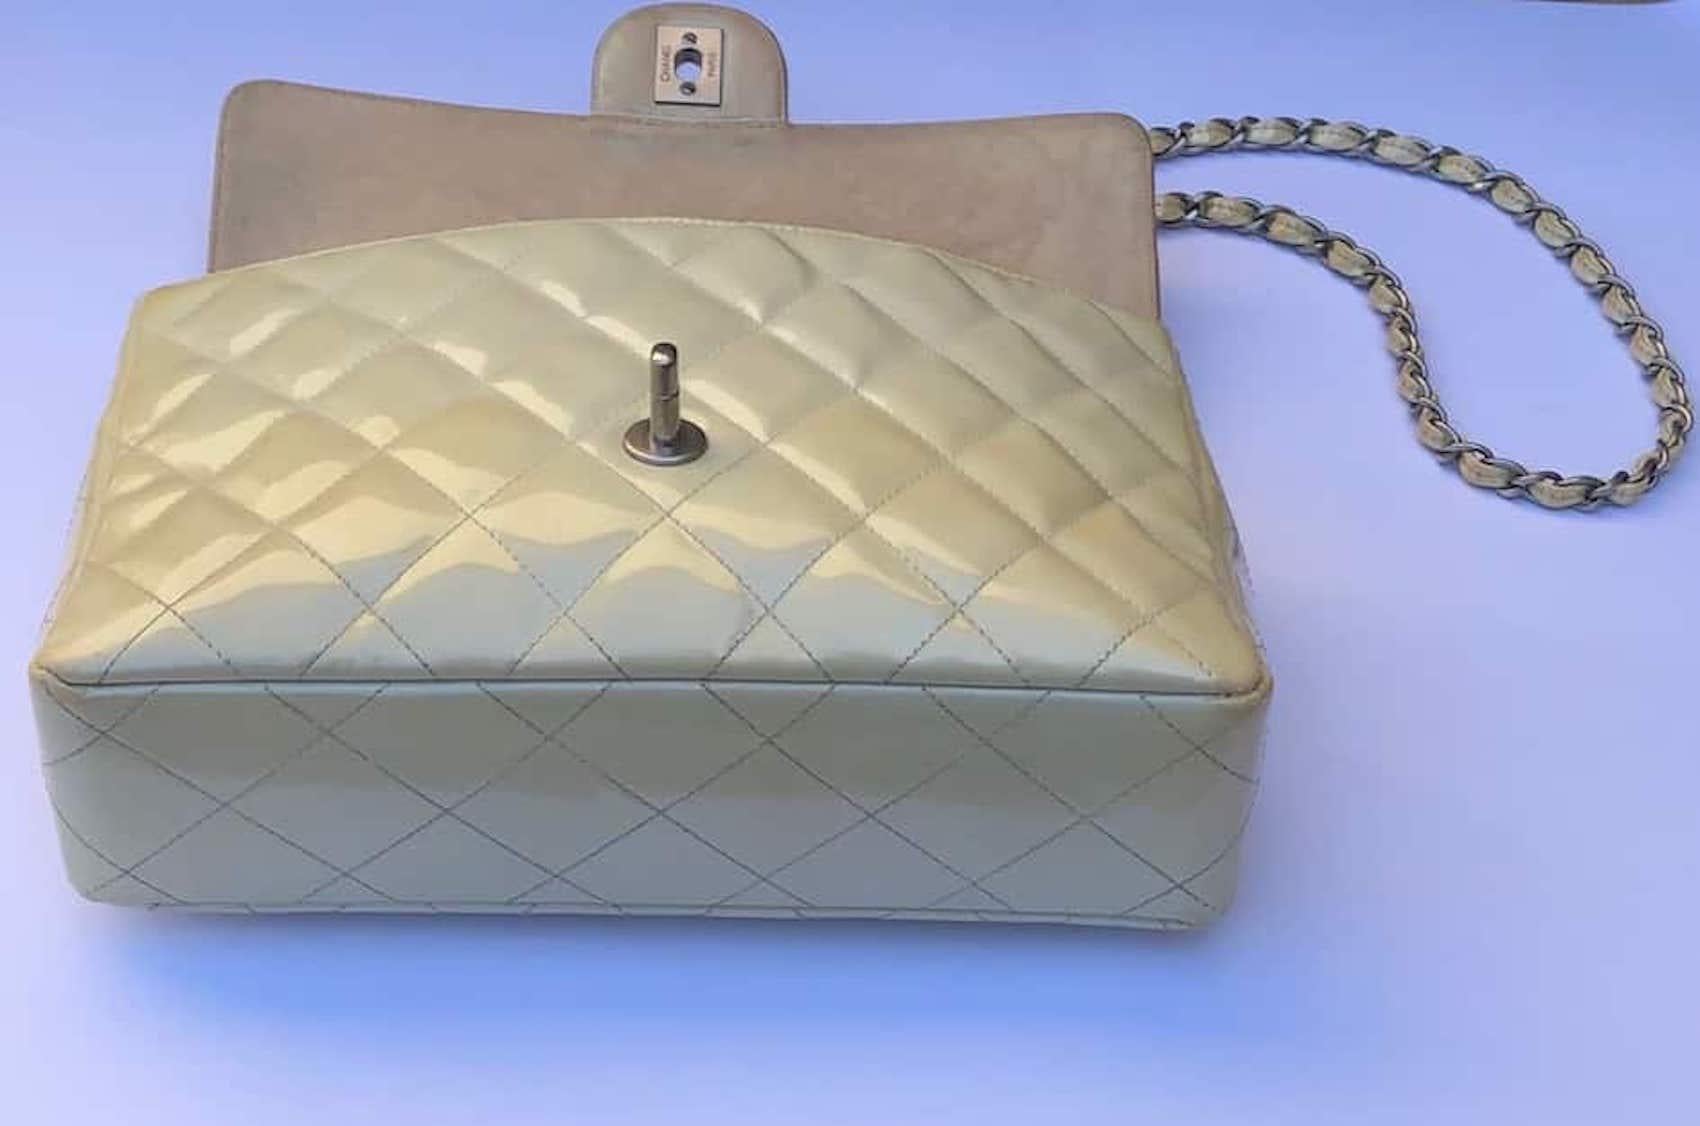 CHANEL Timeless 2.55 Flap Bag Patent Leather Cream Circa 2000 For Sale 2